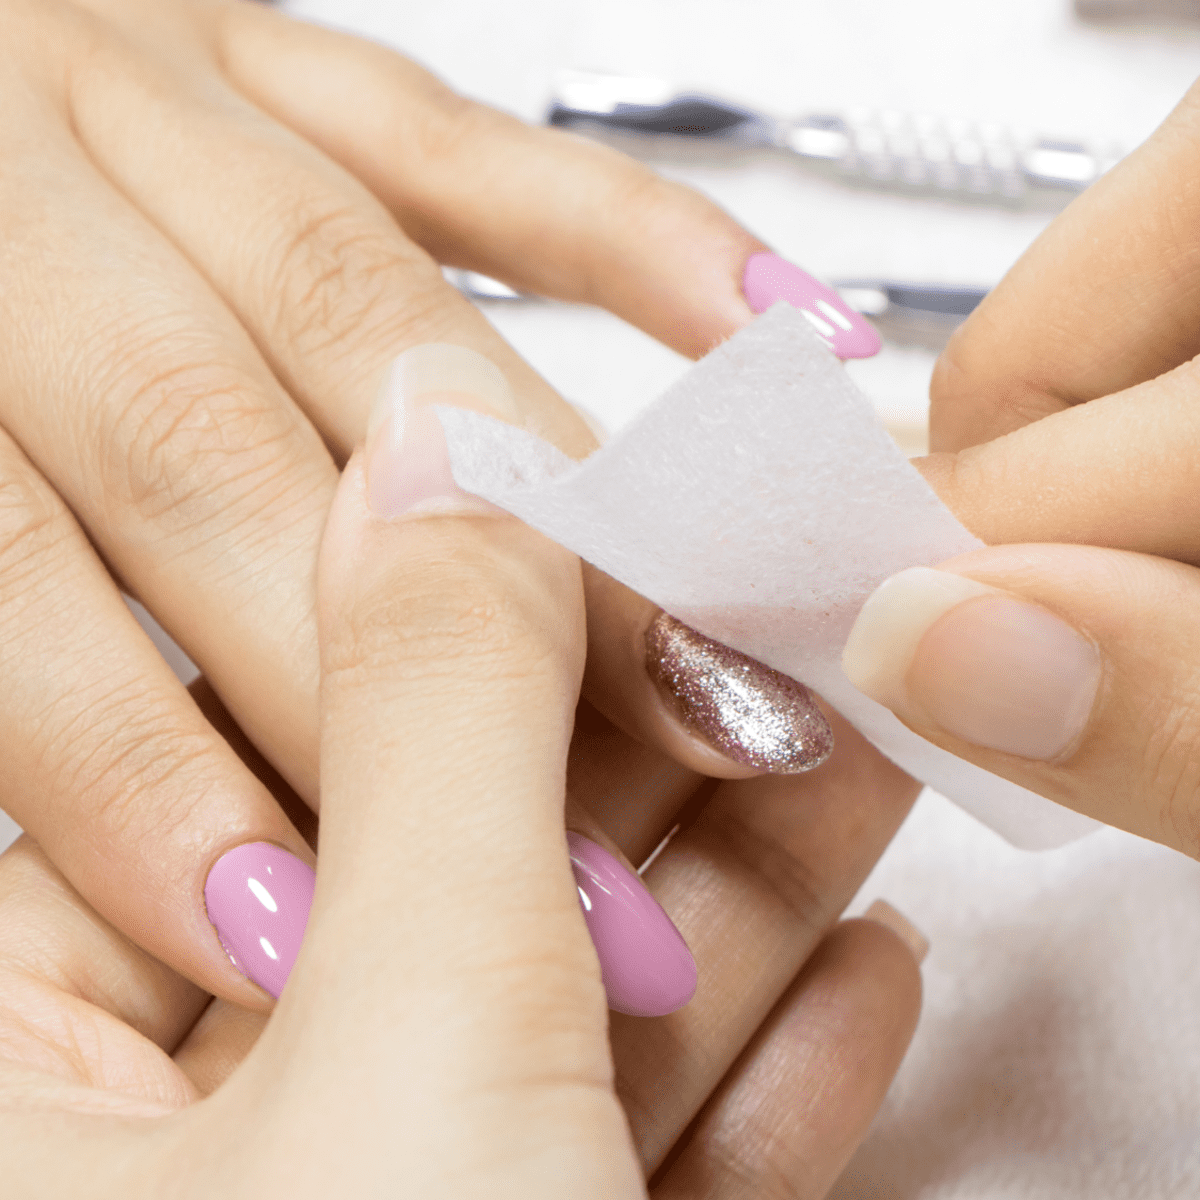 Woman Issues Warning As She Shares Shocking Result of Gel Manicure